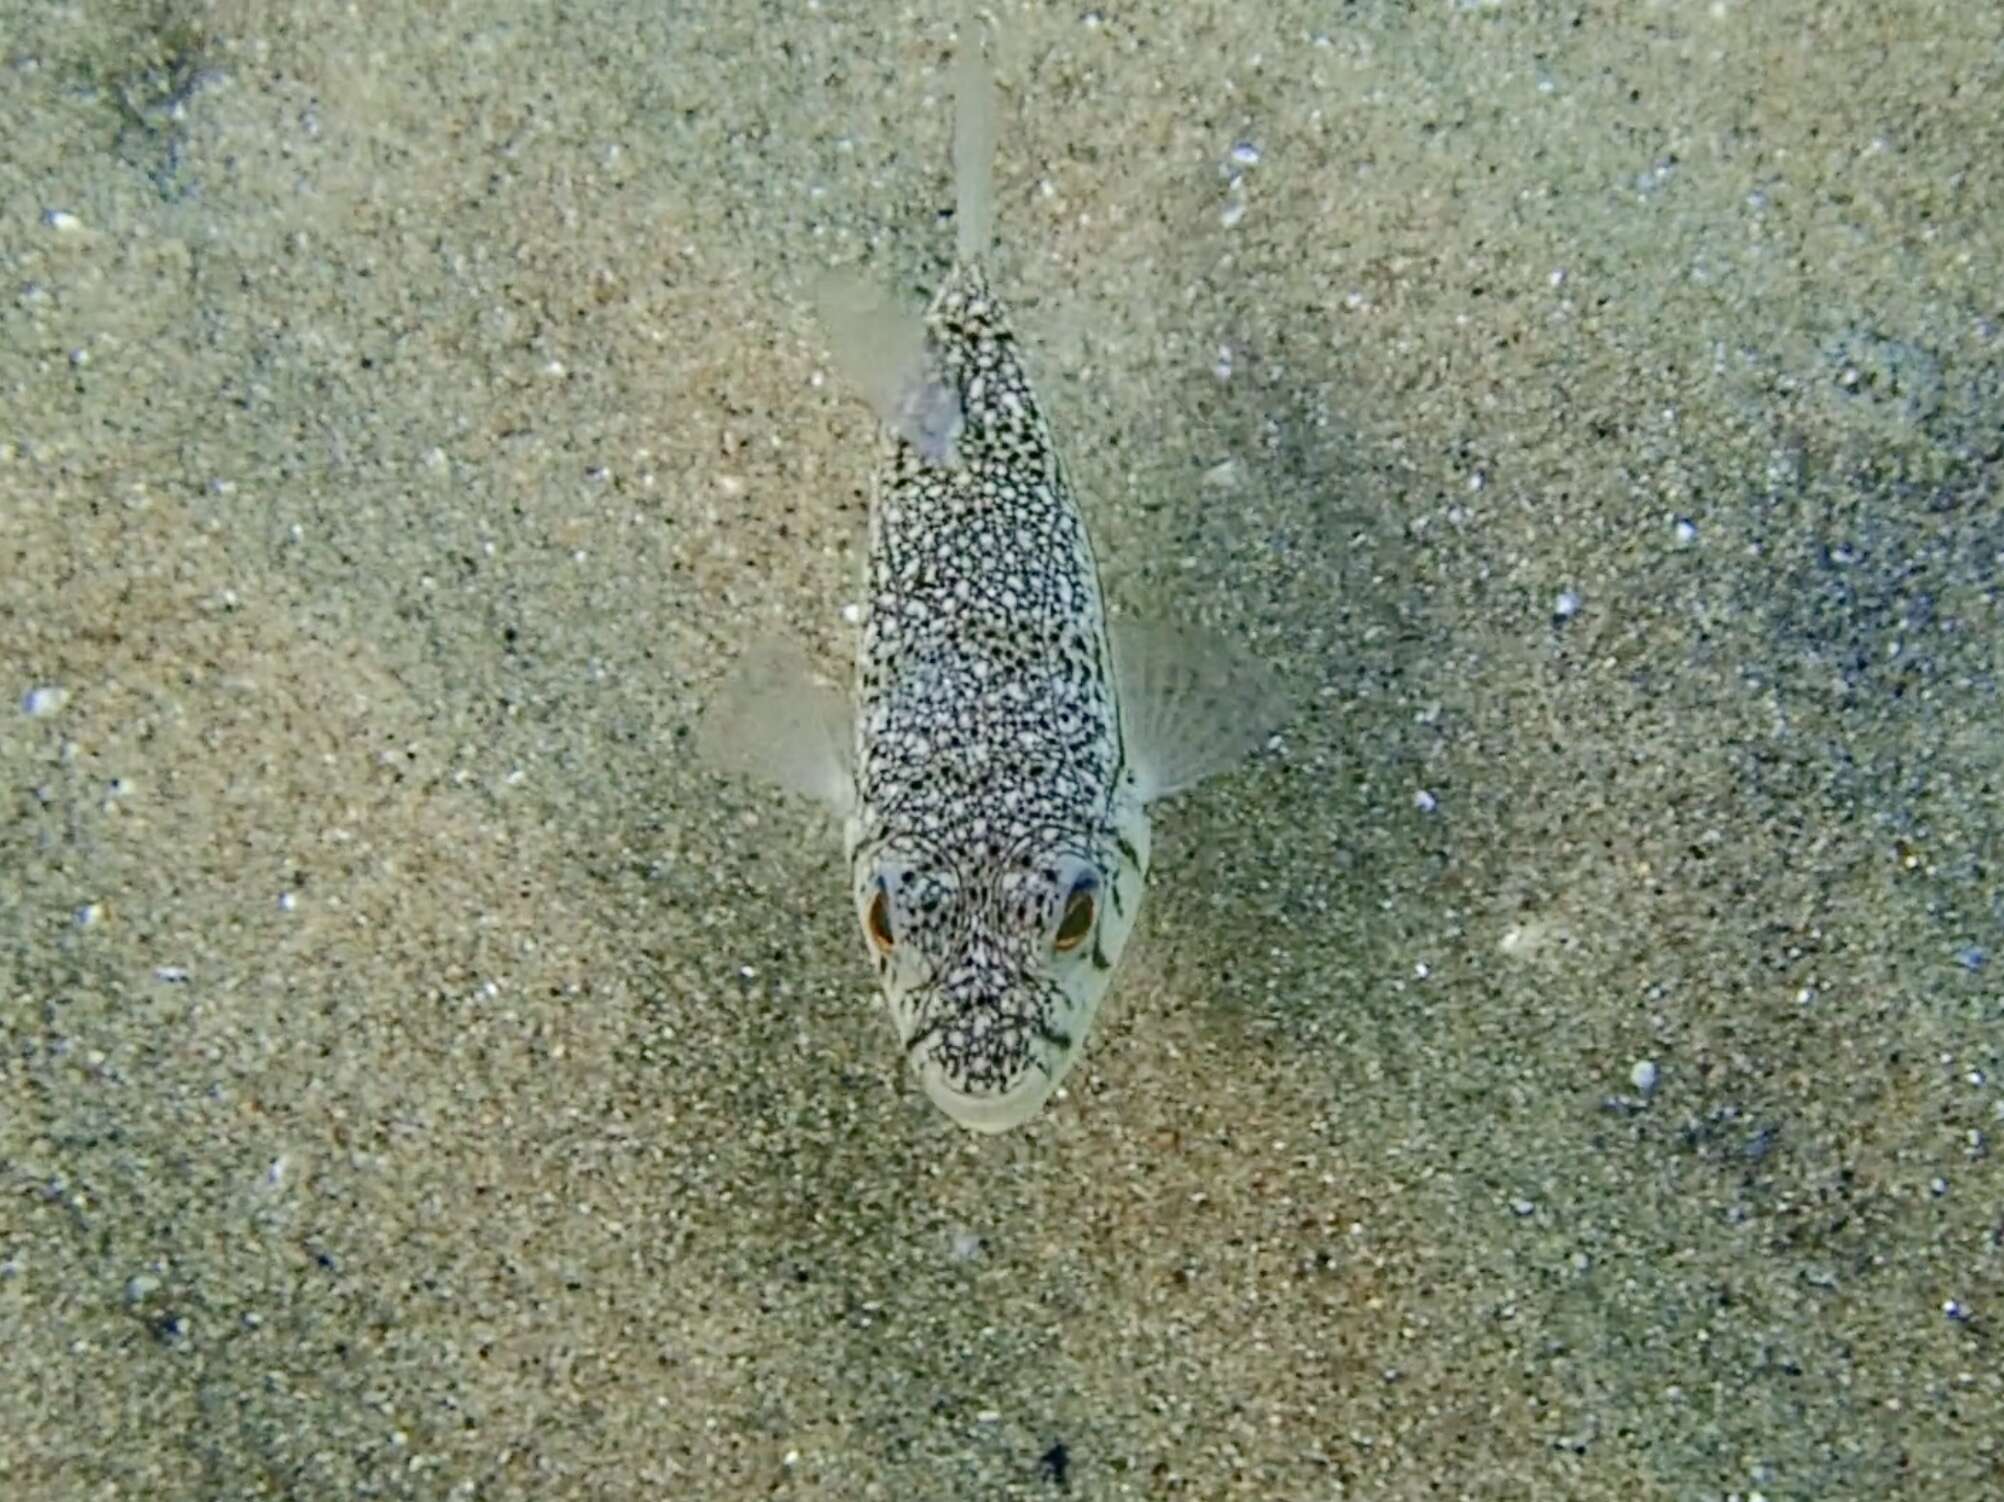 Image of Banded Toadfish